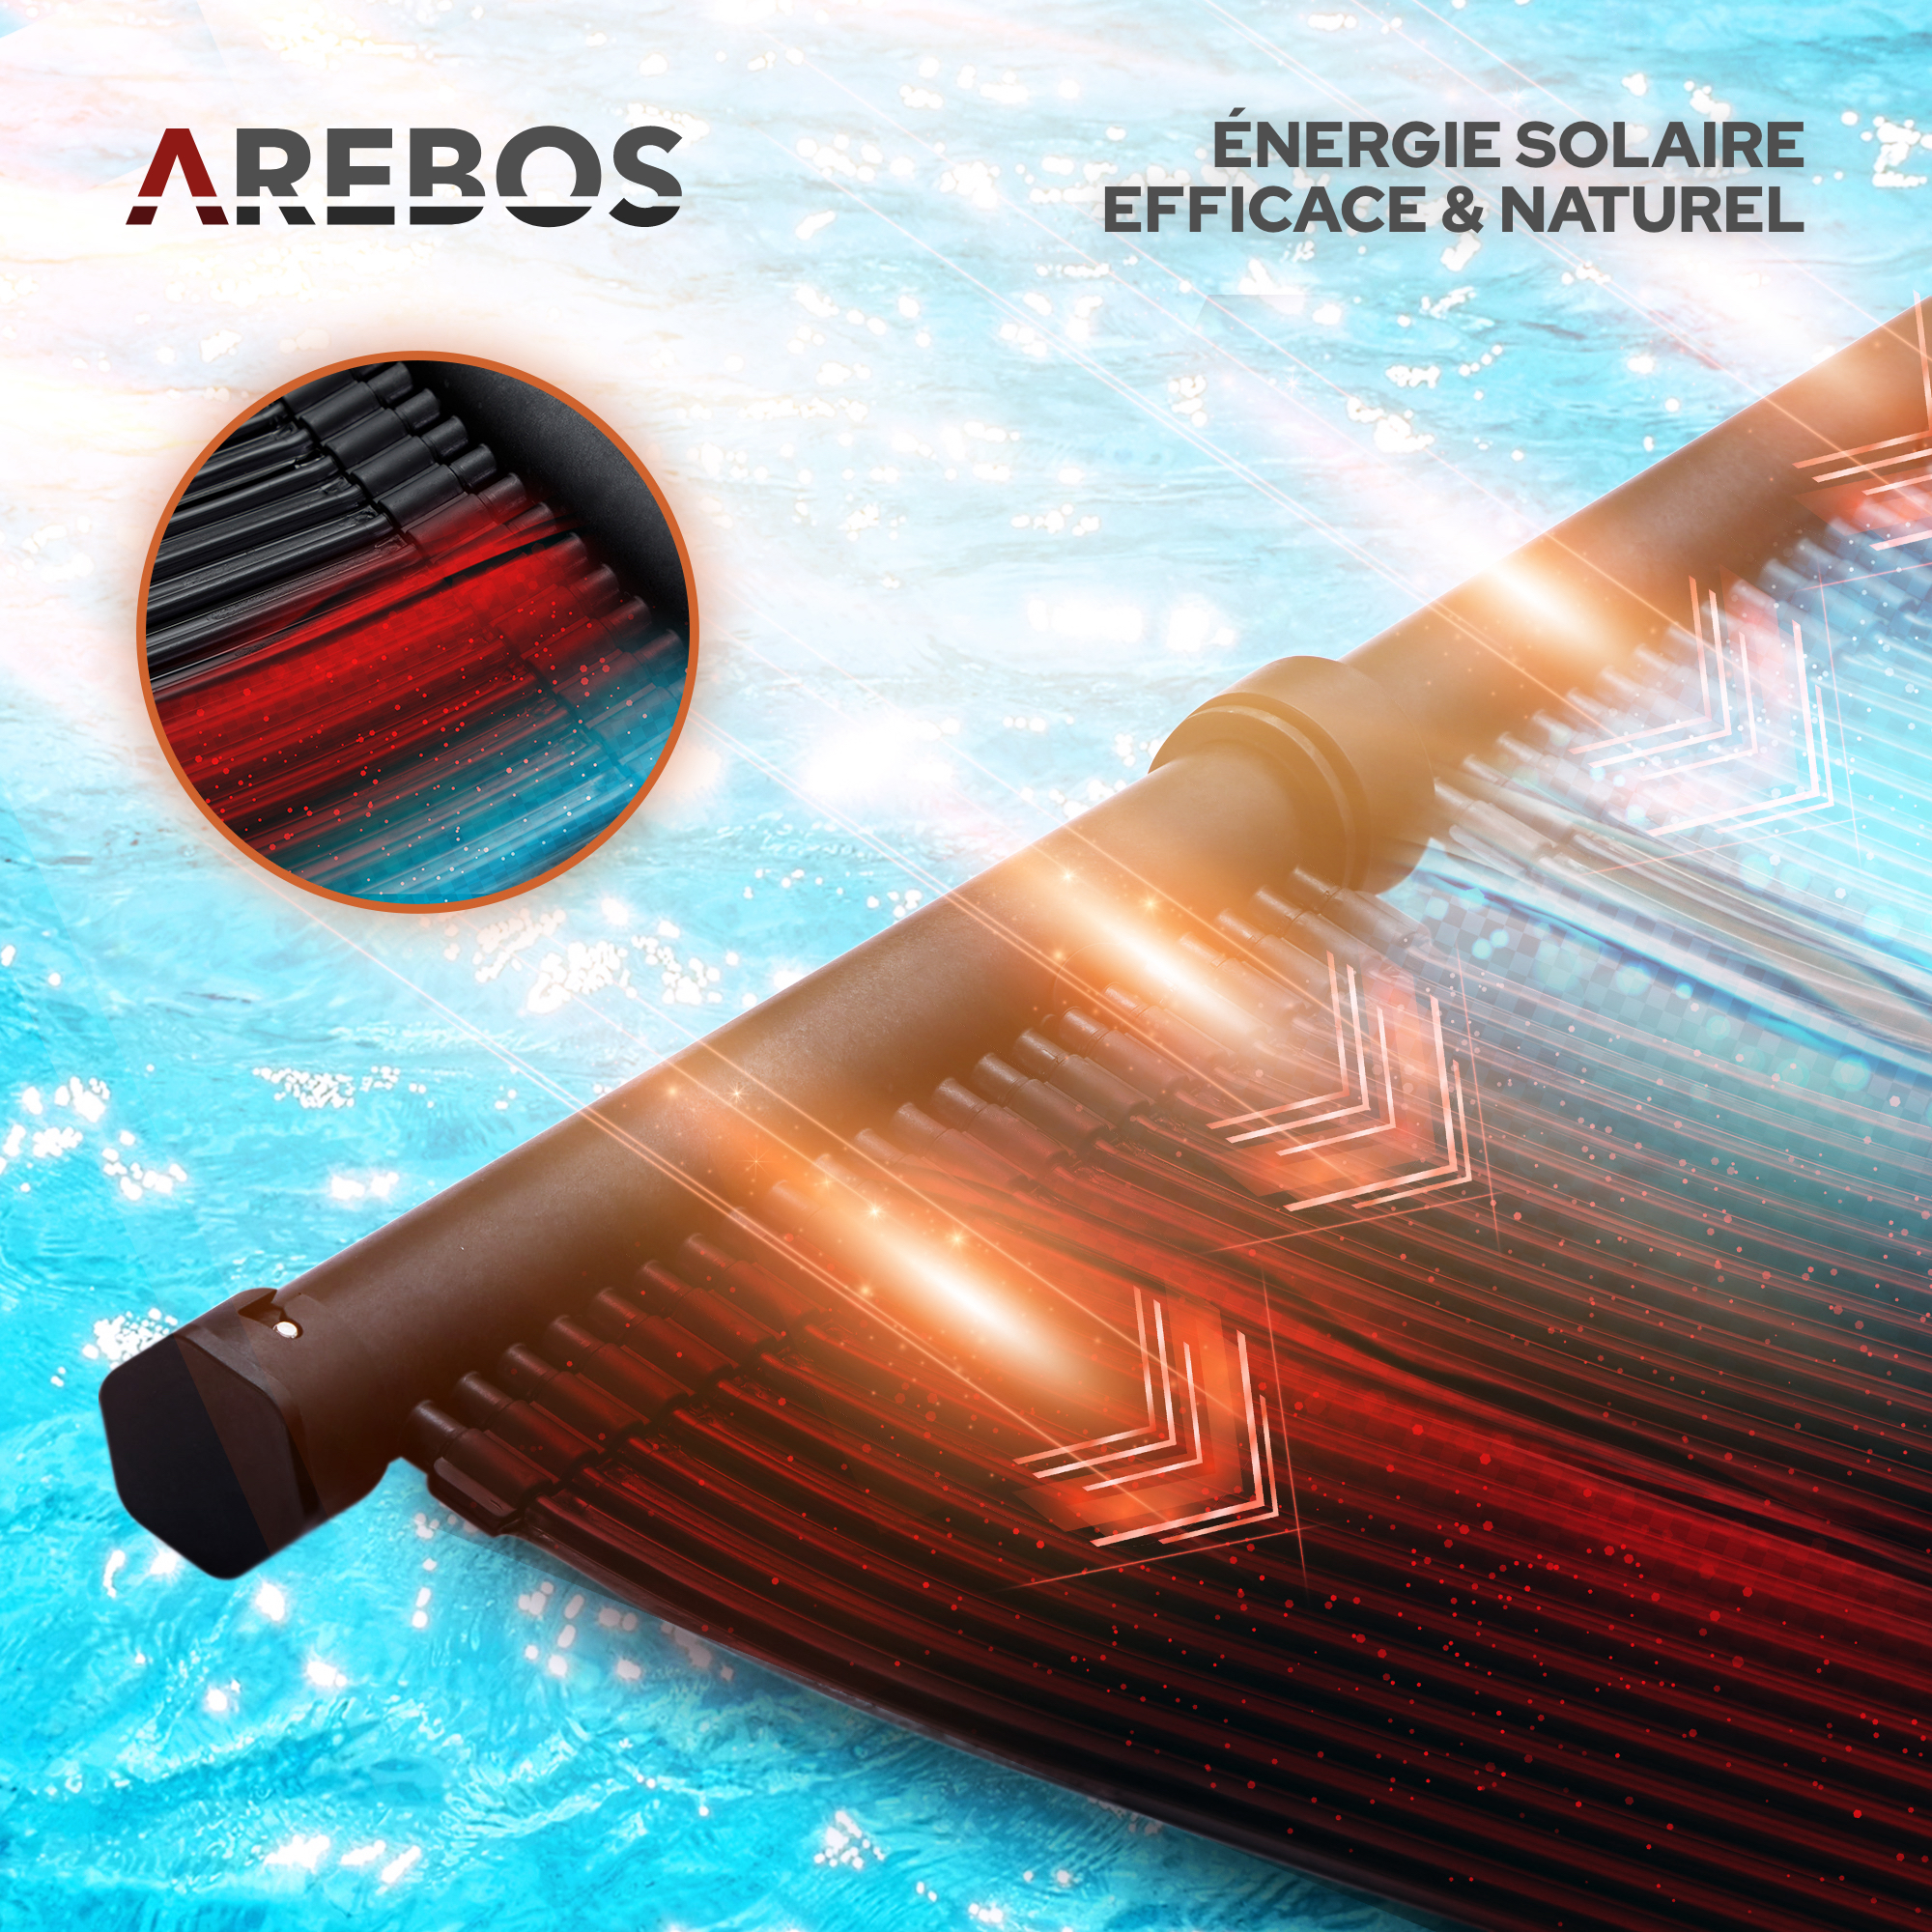 Arebos - 2 x AREBOS Chauffage Solaire Collecteur Solaire Chauffage de  Piscine Tapis Solaire Absorbeur Solaire 66x300 cm - Réchauffeur de piscine  - Rue du Commerce